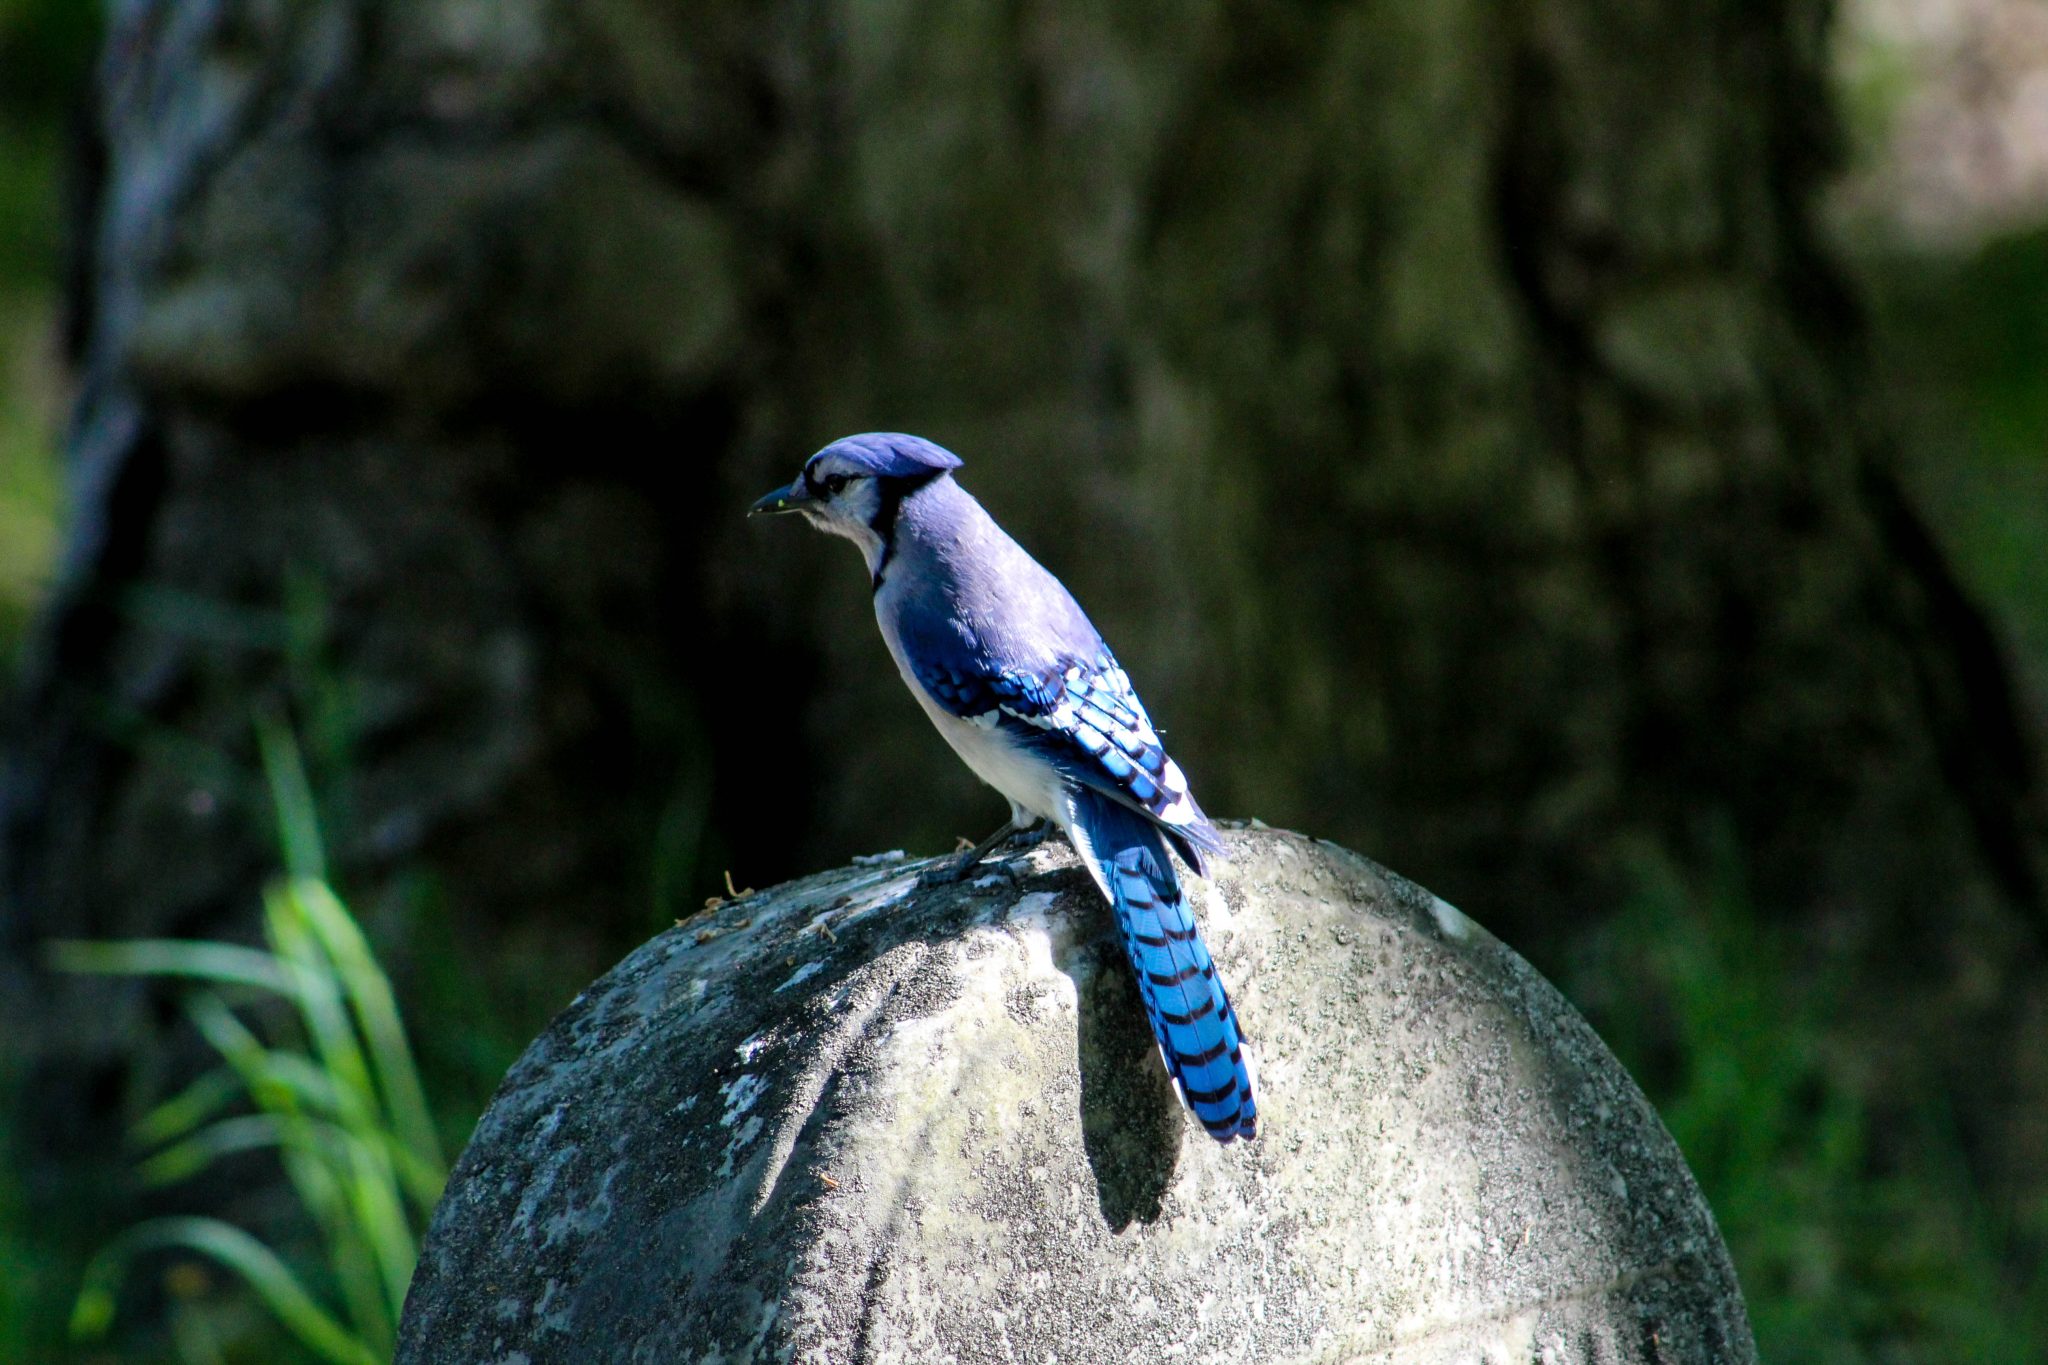 Bluejay perched on a gravestone.